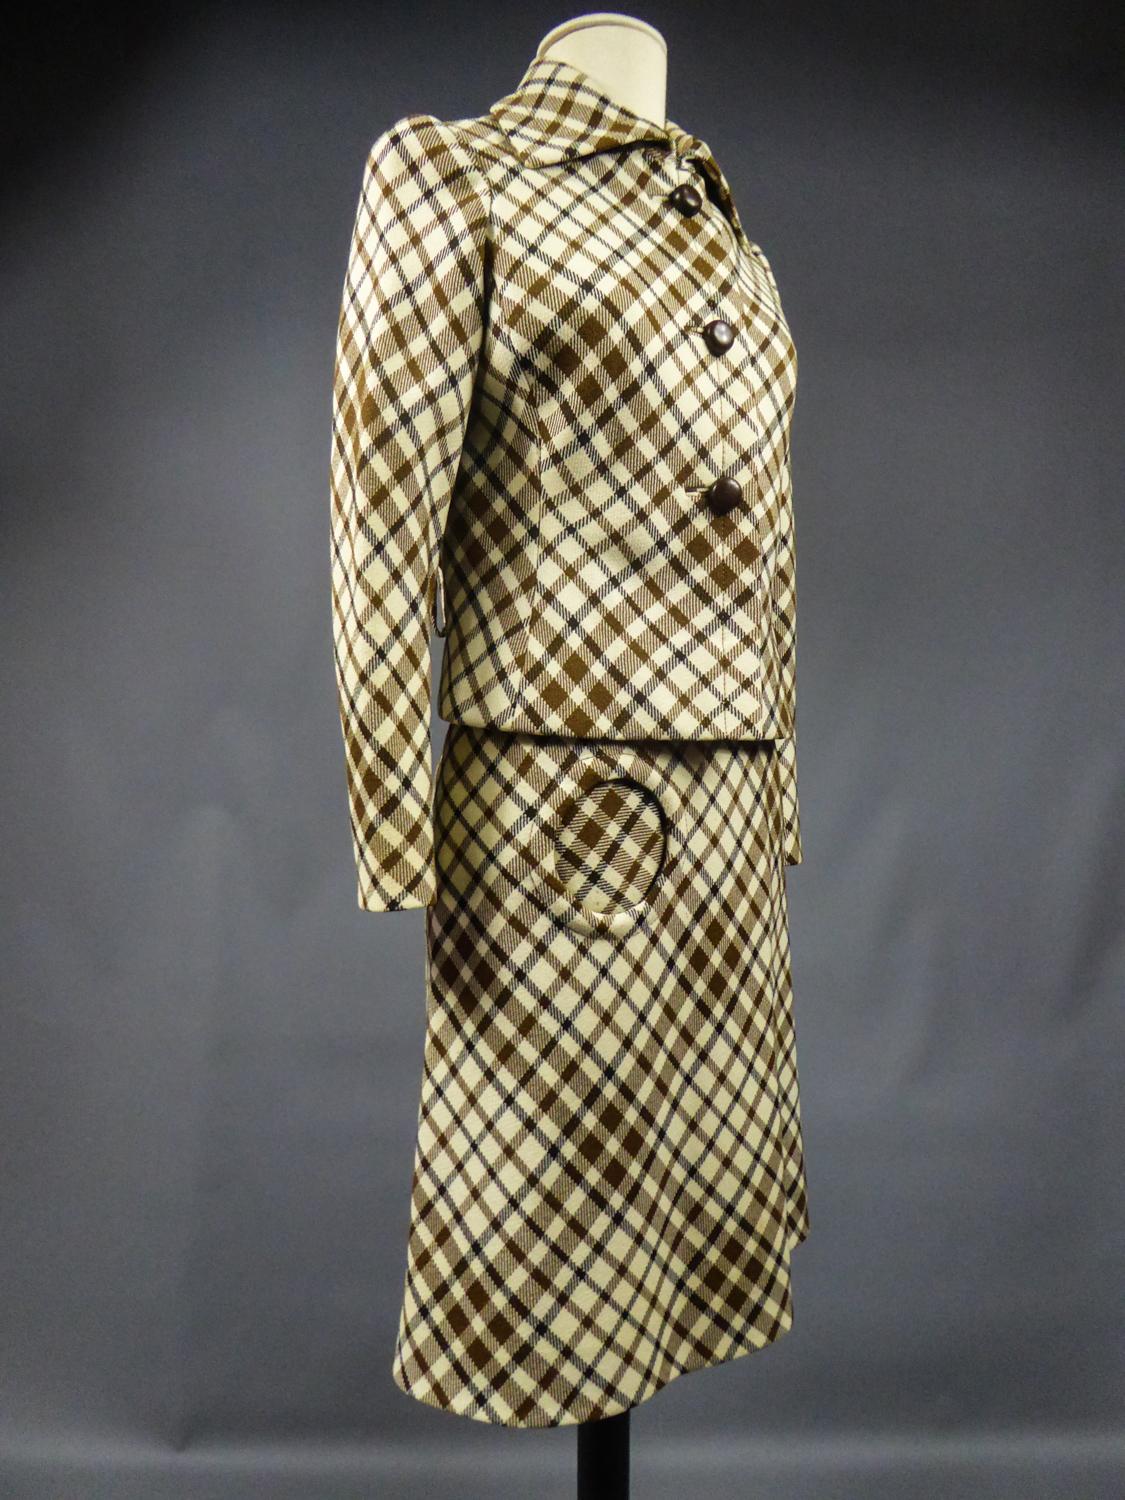 Women's French Skirt Suit Demi-Couture Christian Dior / Bérénice Marseille Circa 1968